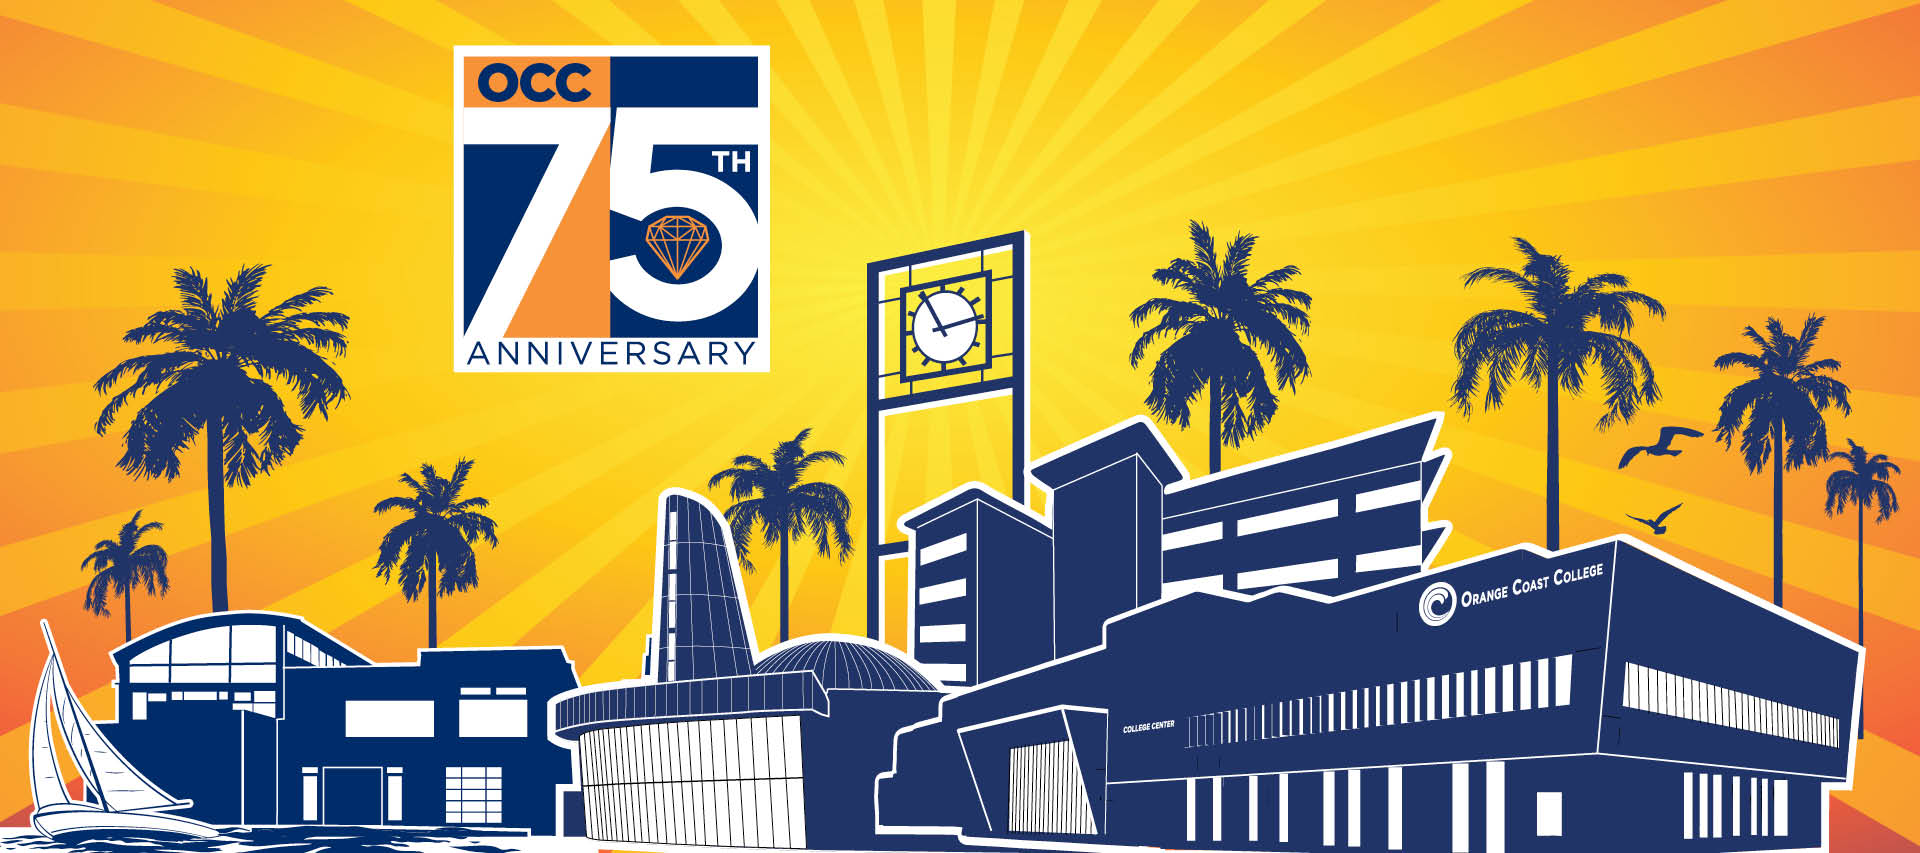 Campus skyline in blue and orange with 75th logo. Text: OCC 75th Anniversary